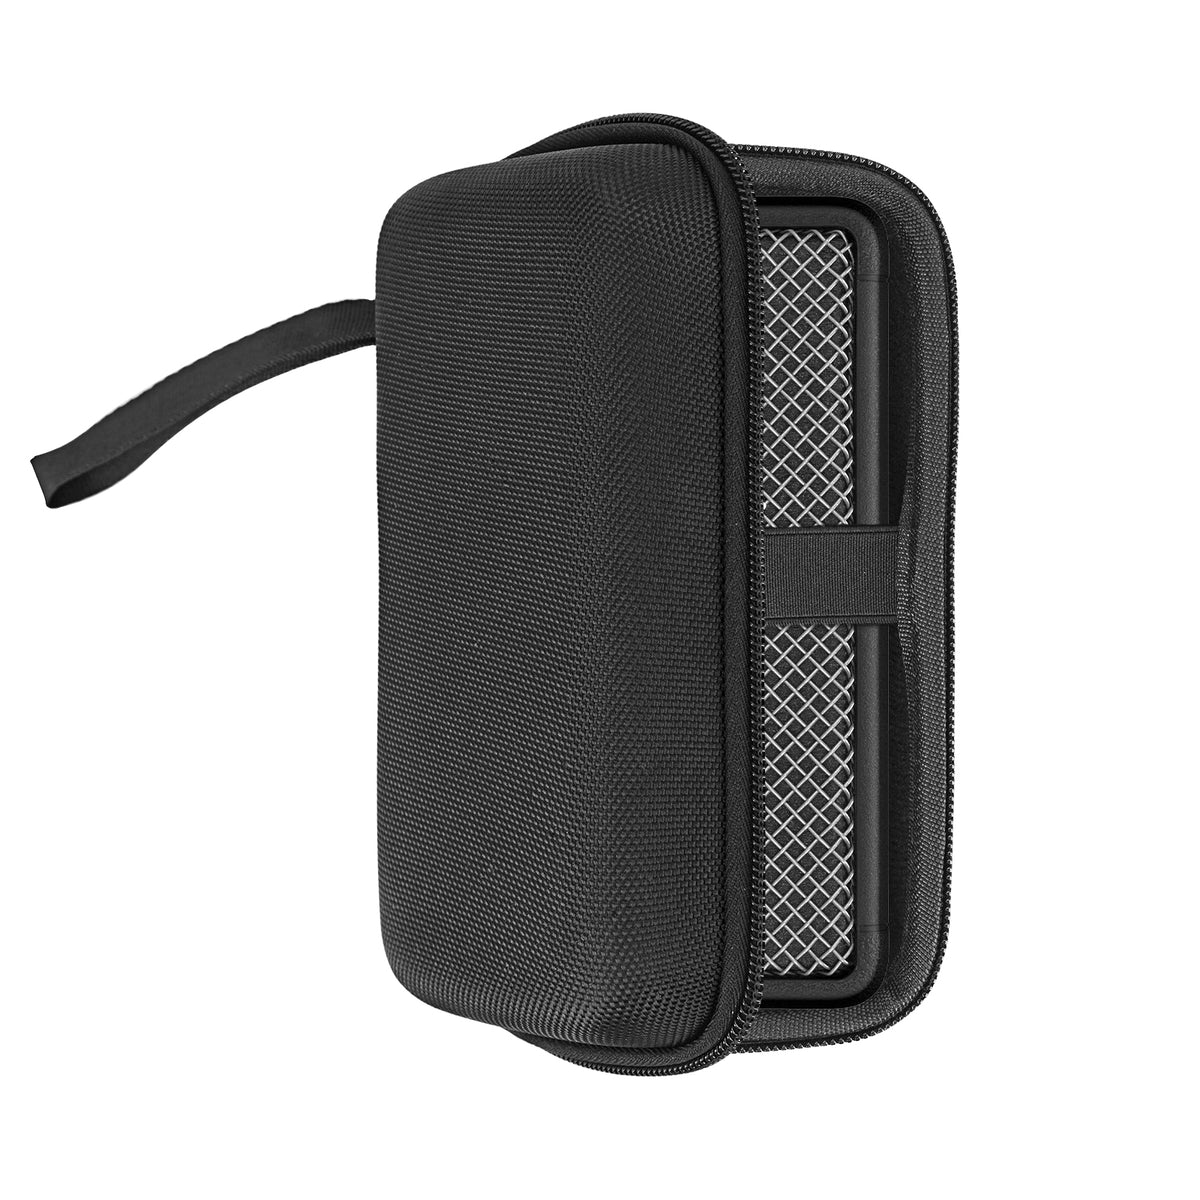 M.G.R.J® Portable Carrying Case Cover for Marshall Emberton